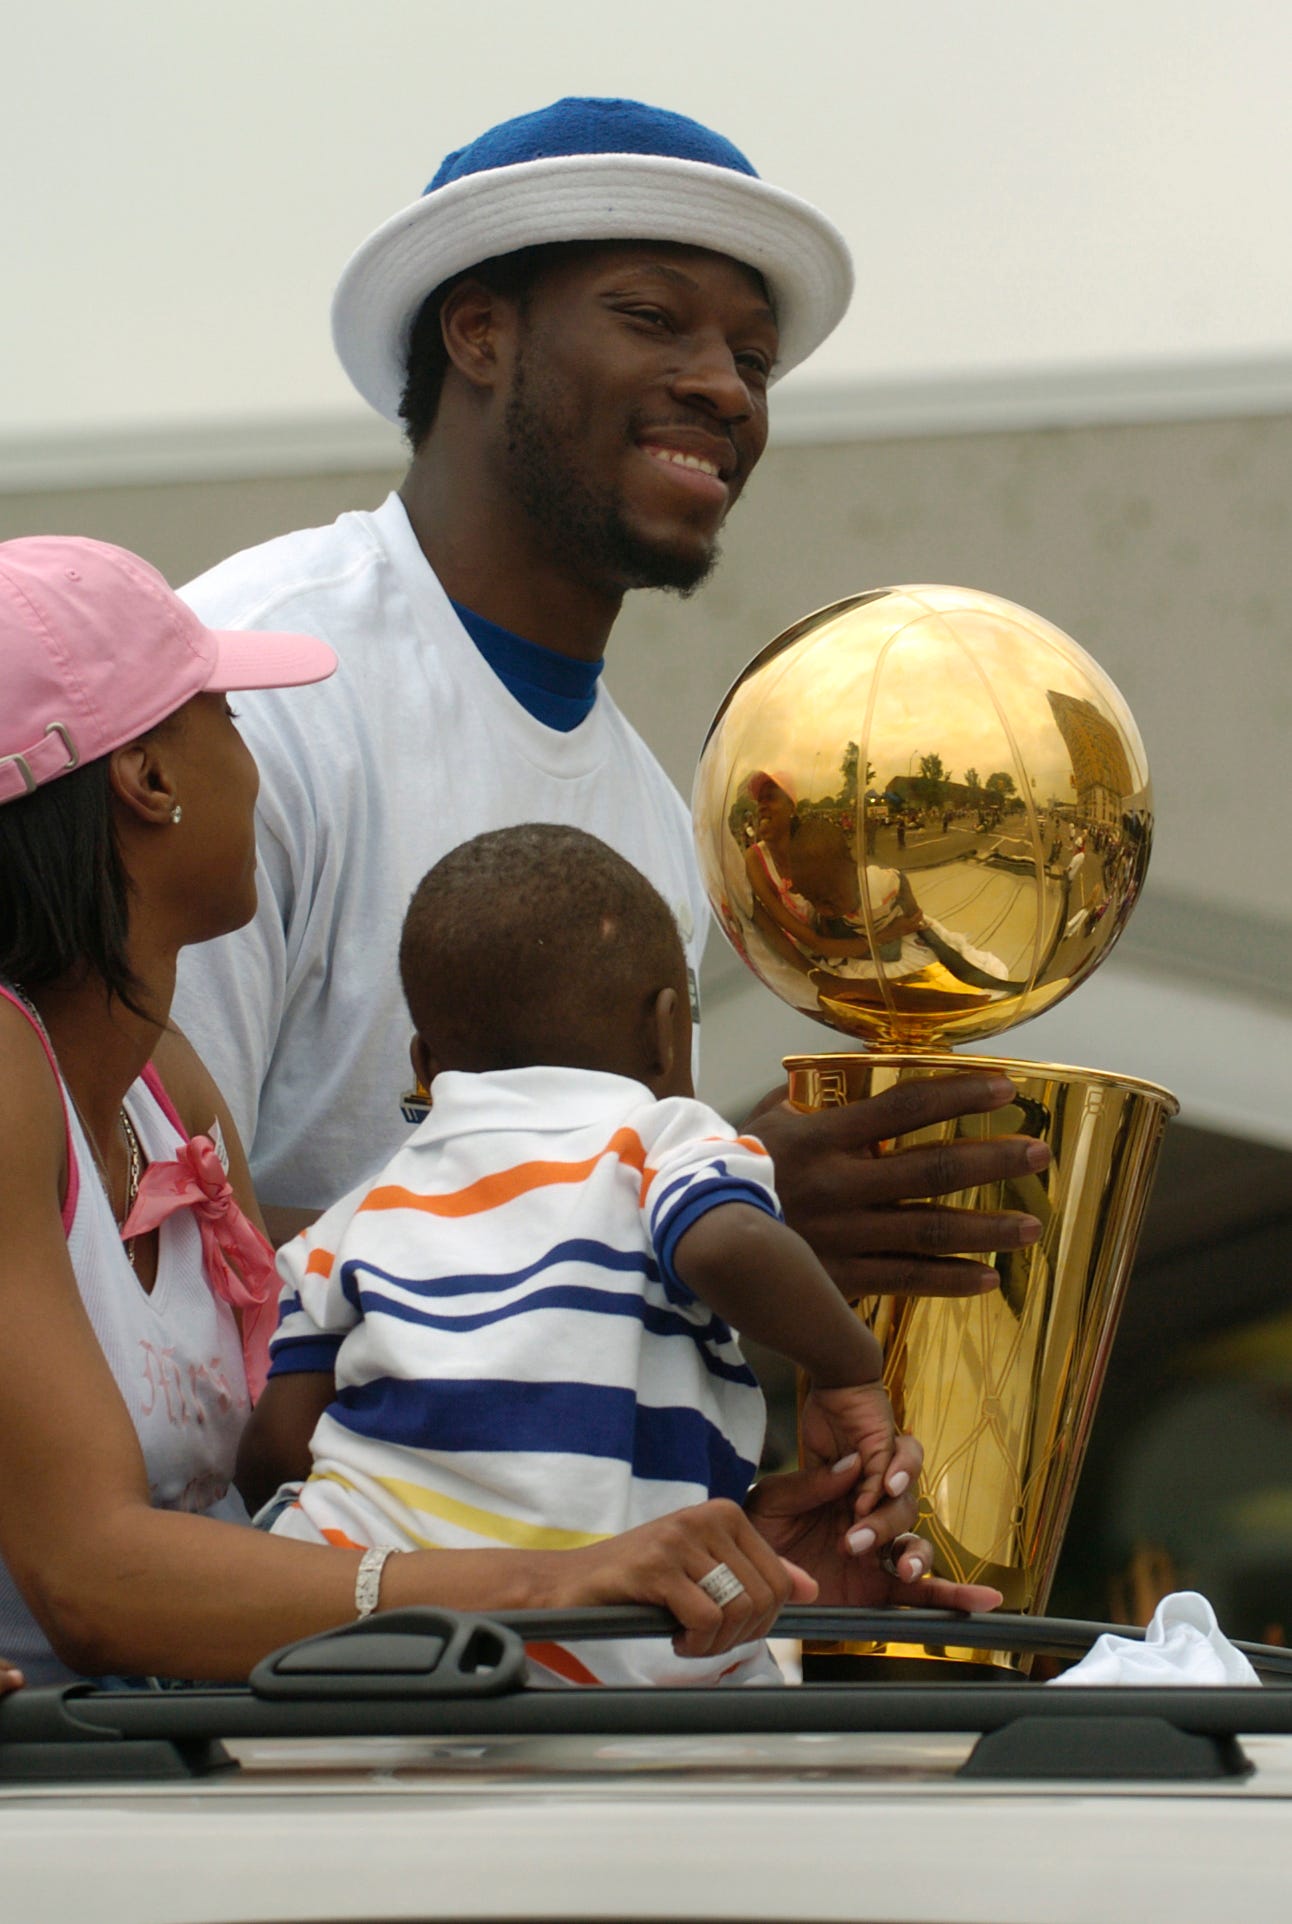 Ben Wallace with his family and the championship trophy in the parade.